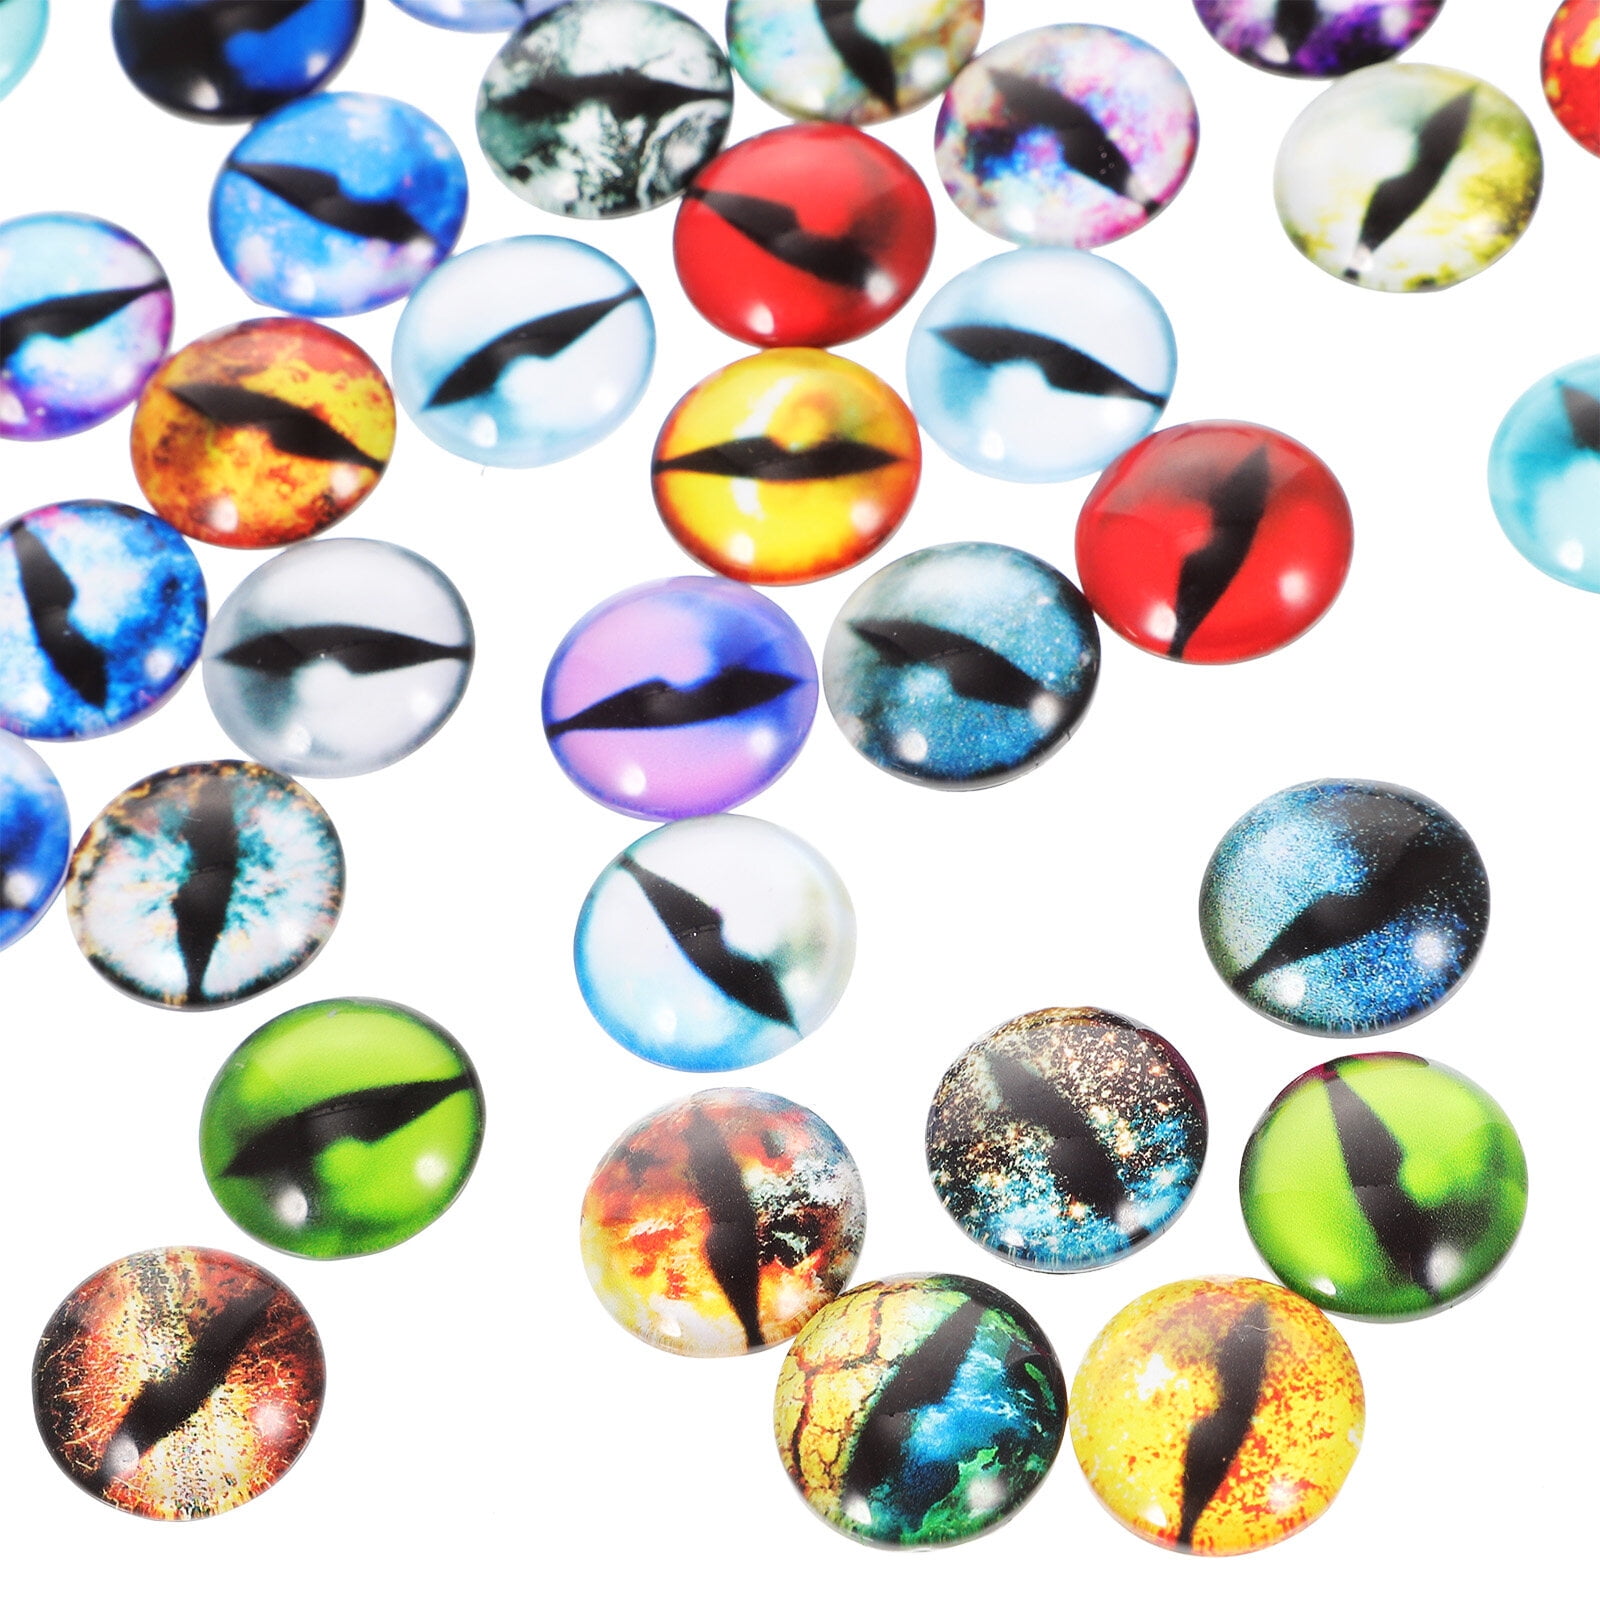 EXCEART 400 Pcs Glass Eye Patch Decor Doll Eyes for Crafts Craft Eyes  Eyeballs for Crafts DIY Glass Eyes Eyeballs for Halloween Glass Eye Beads  Toy